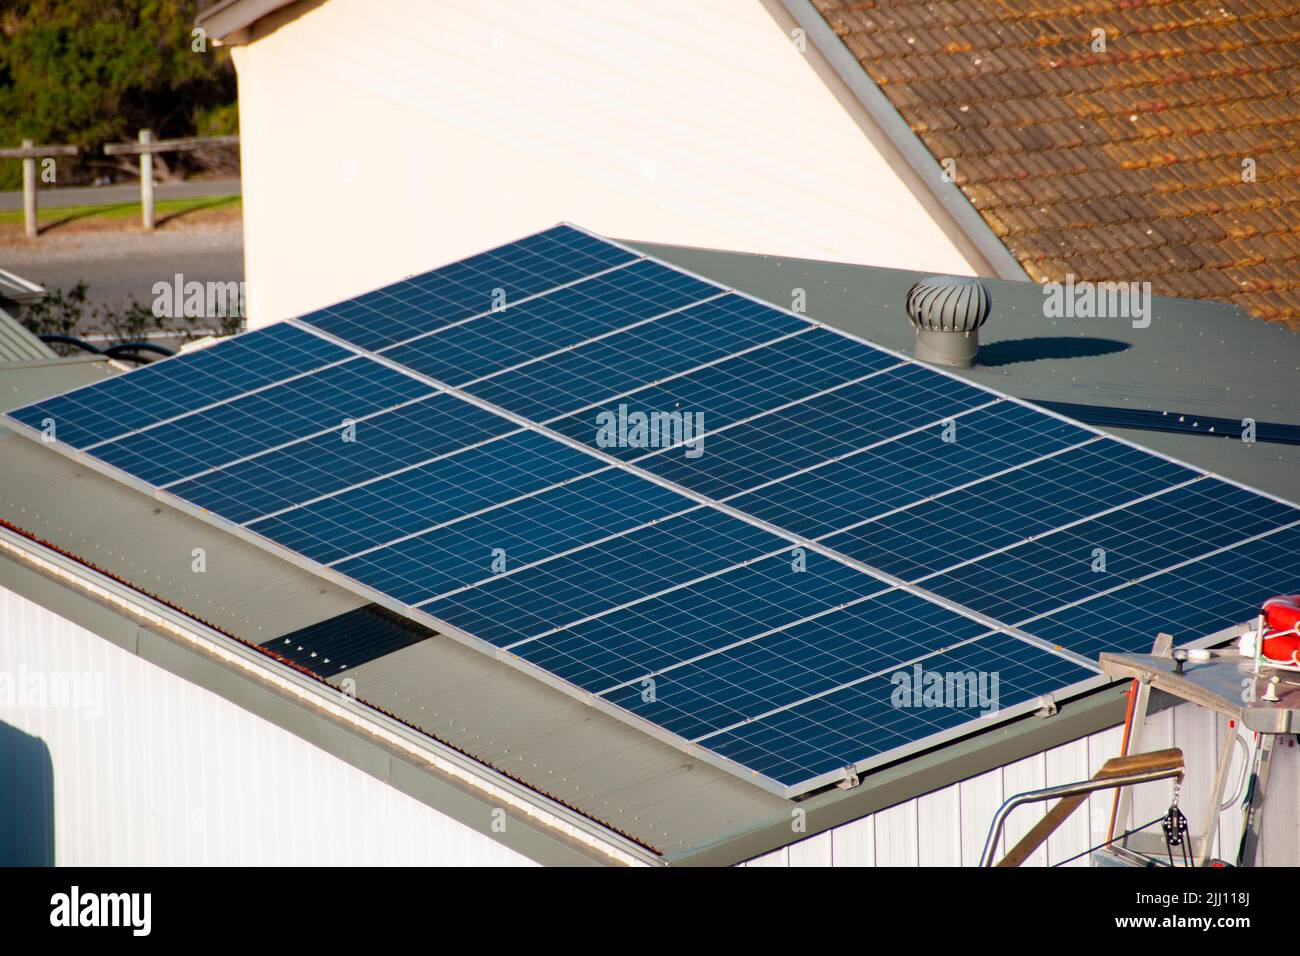 Residential Solar Panels on House Roof Stock Photo